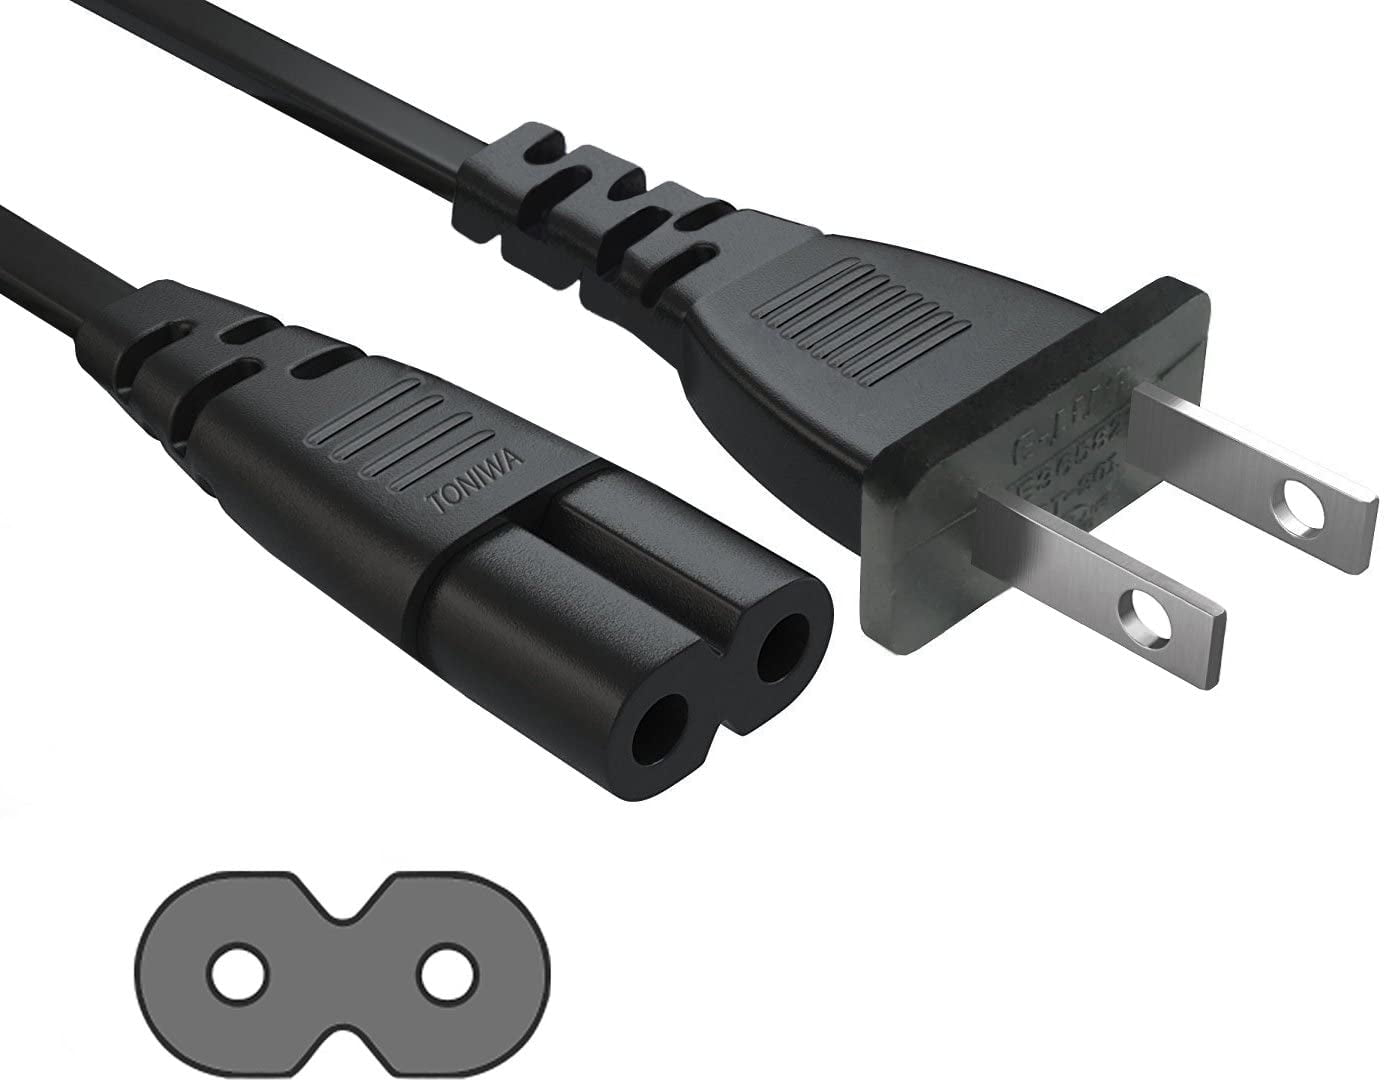 Problem bule angivet Premium 2-Prong AC Power Adapter Cord Cable Lead For Sony Playstation 4 PS4  PS1 PS2 PS3 Sega Saturn Xbox Dreamcast and Xbox one slim - Walmart.com